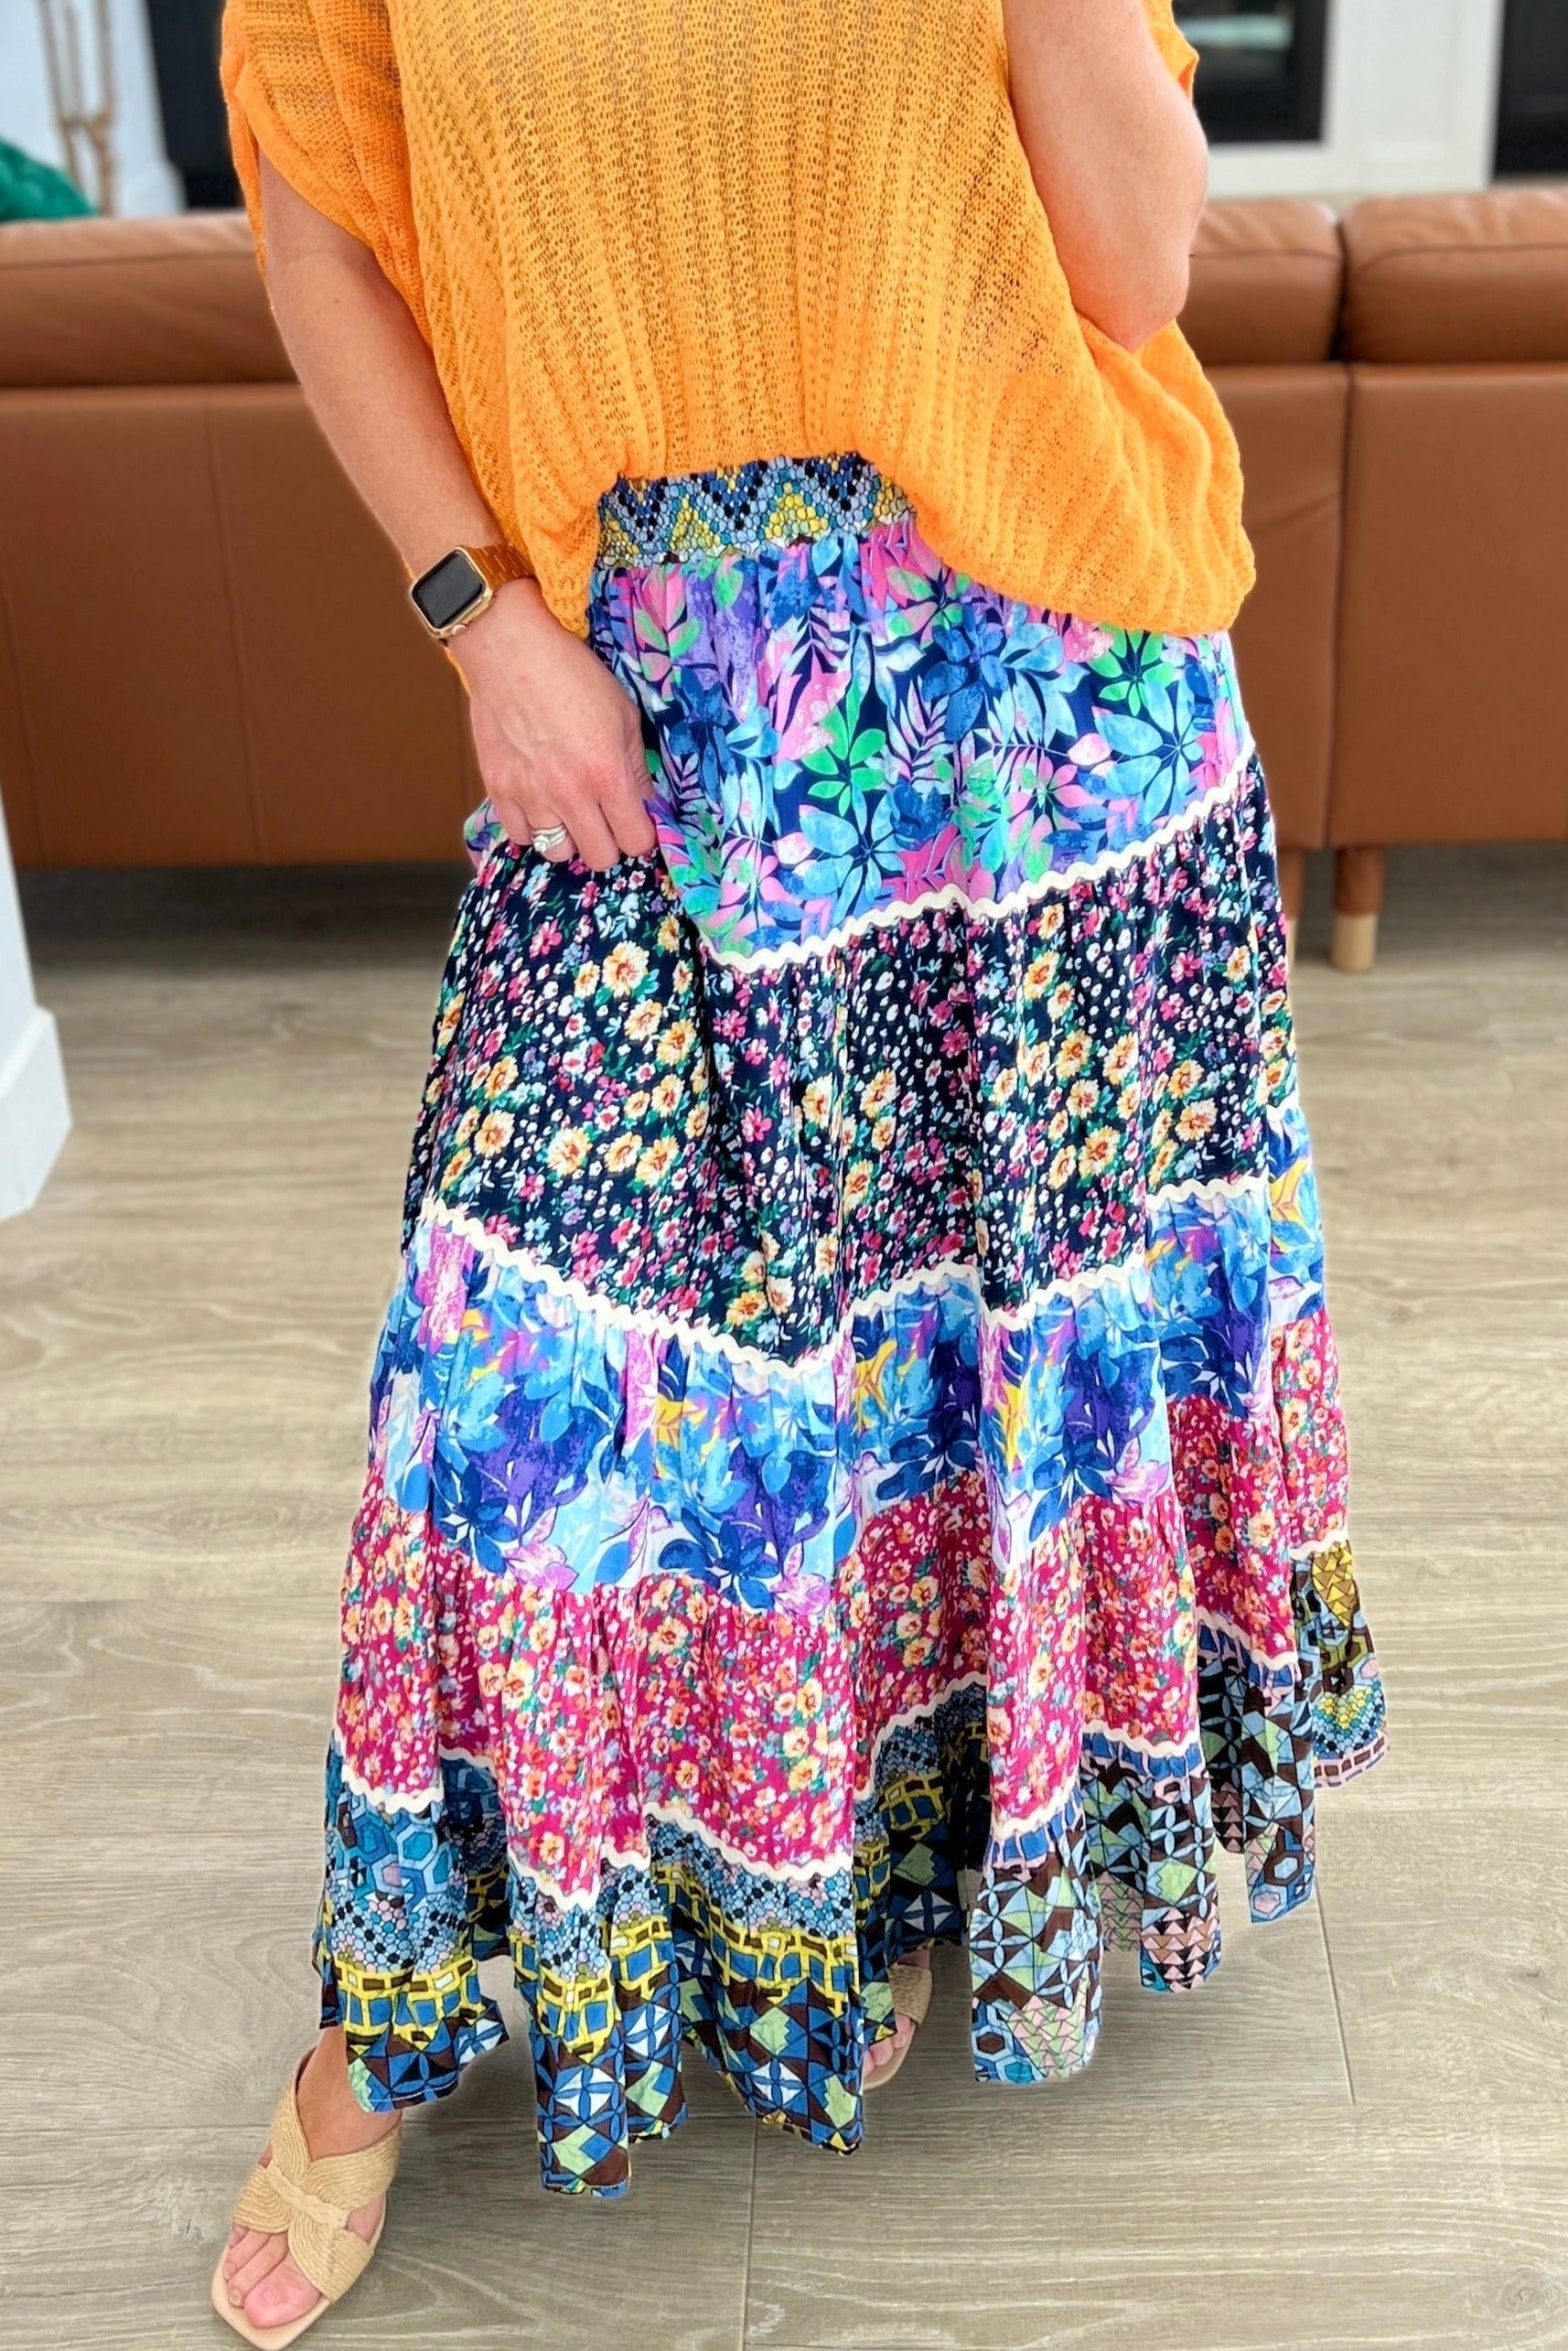 Everlasting Friend Boho Tiered Skirt in Multicolor by White Birch